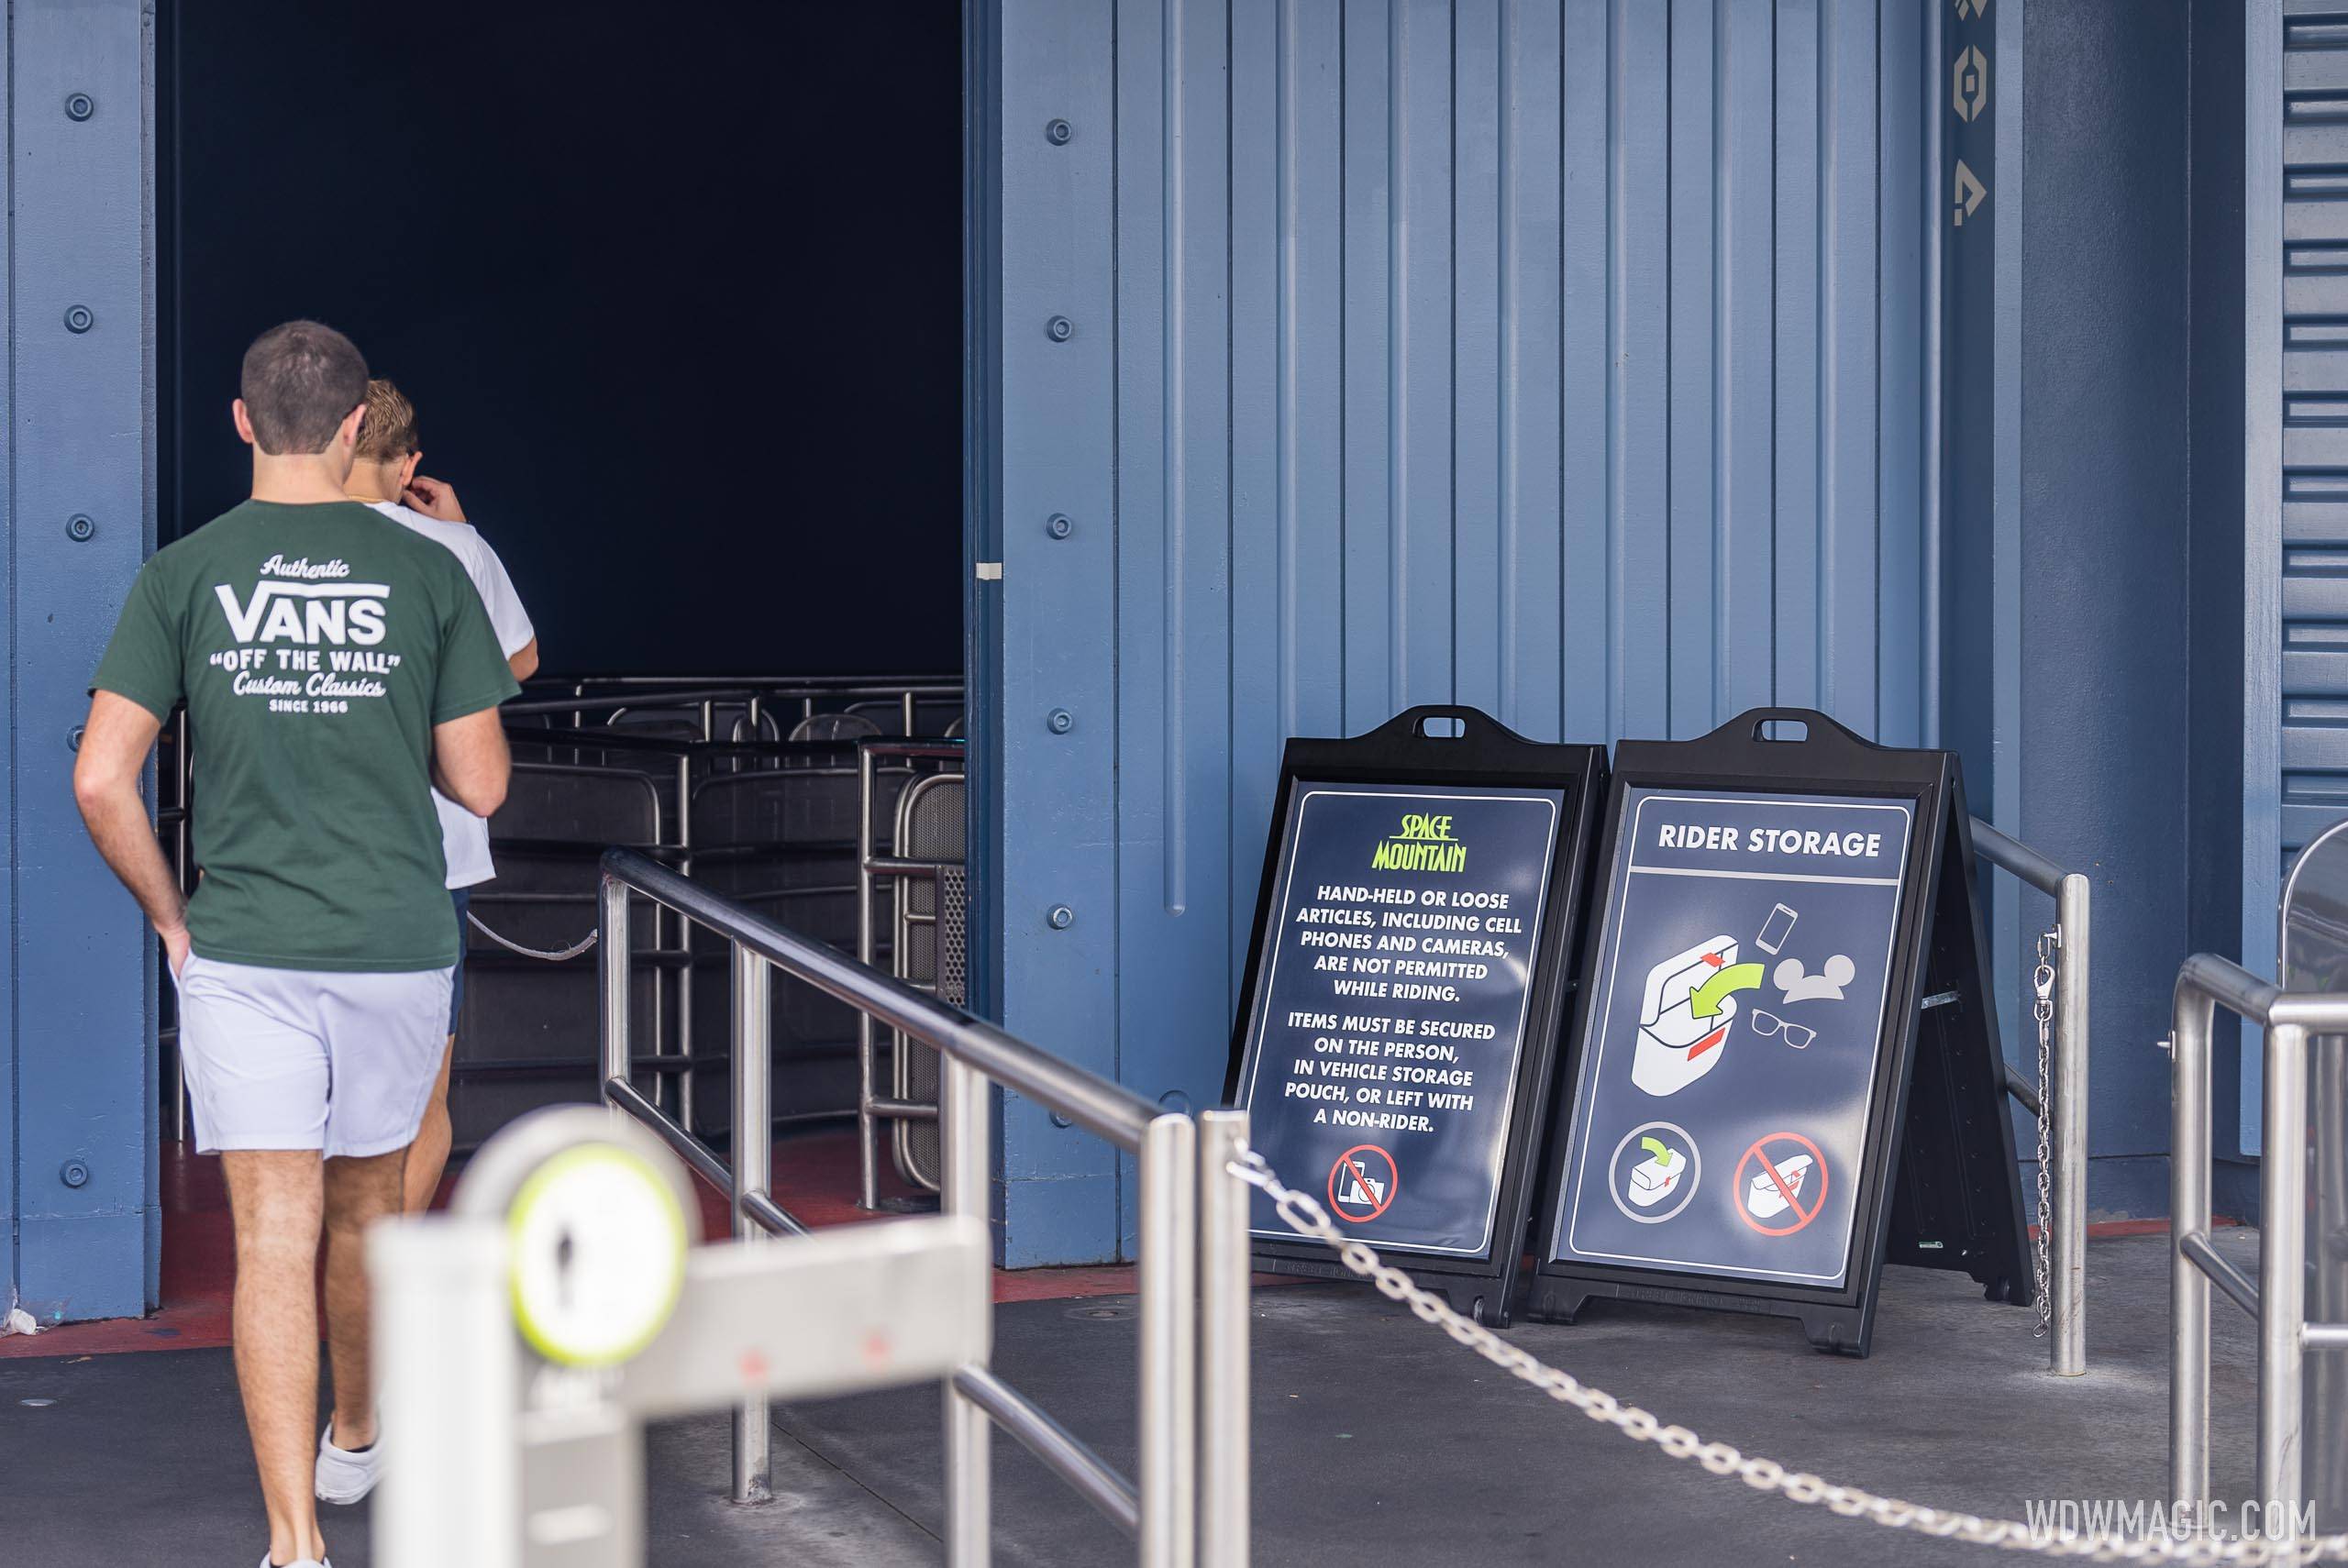 New rider rules on Space Mountain for hand-held items